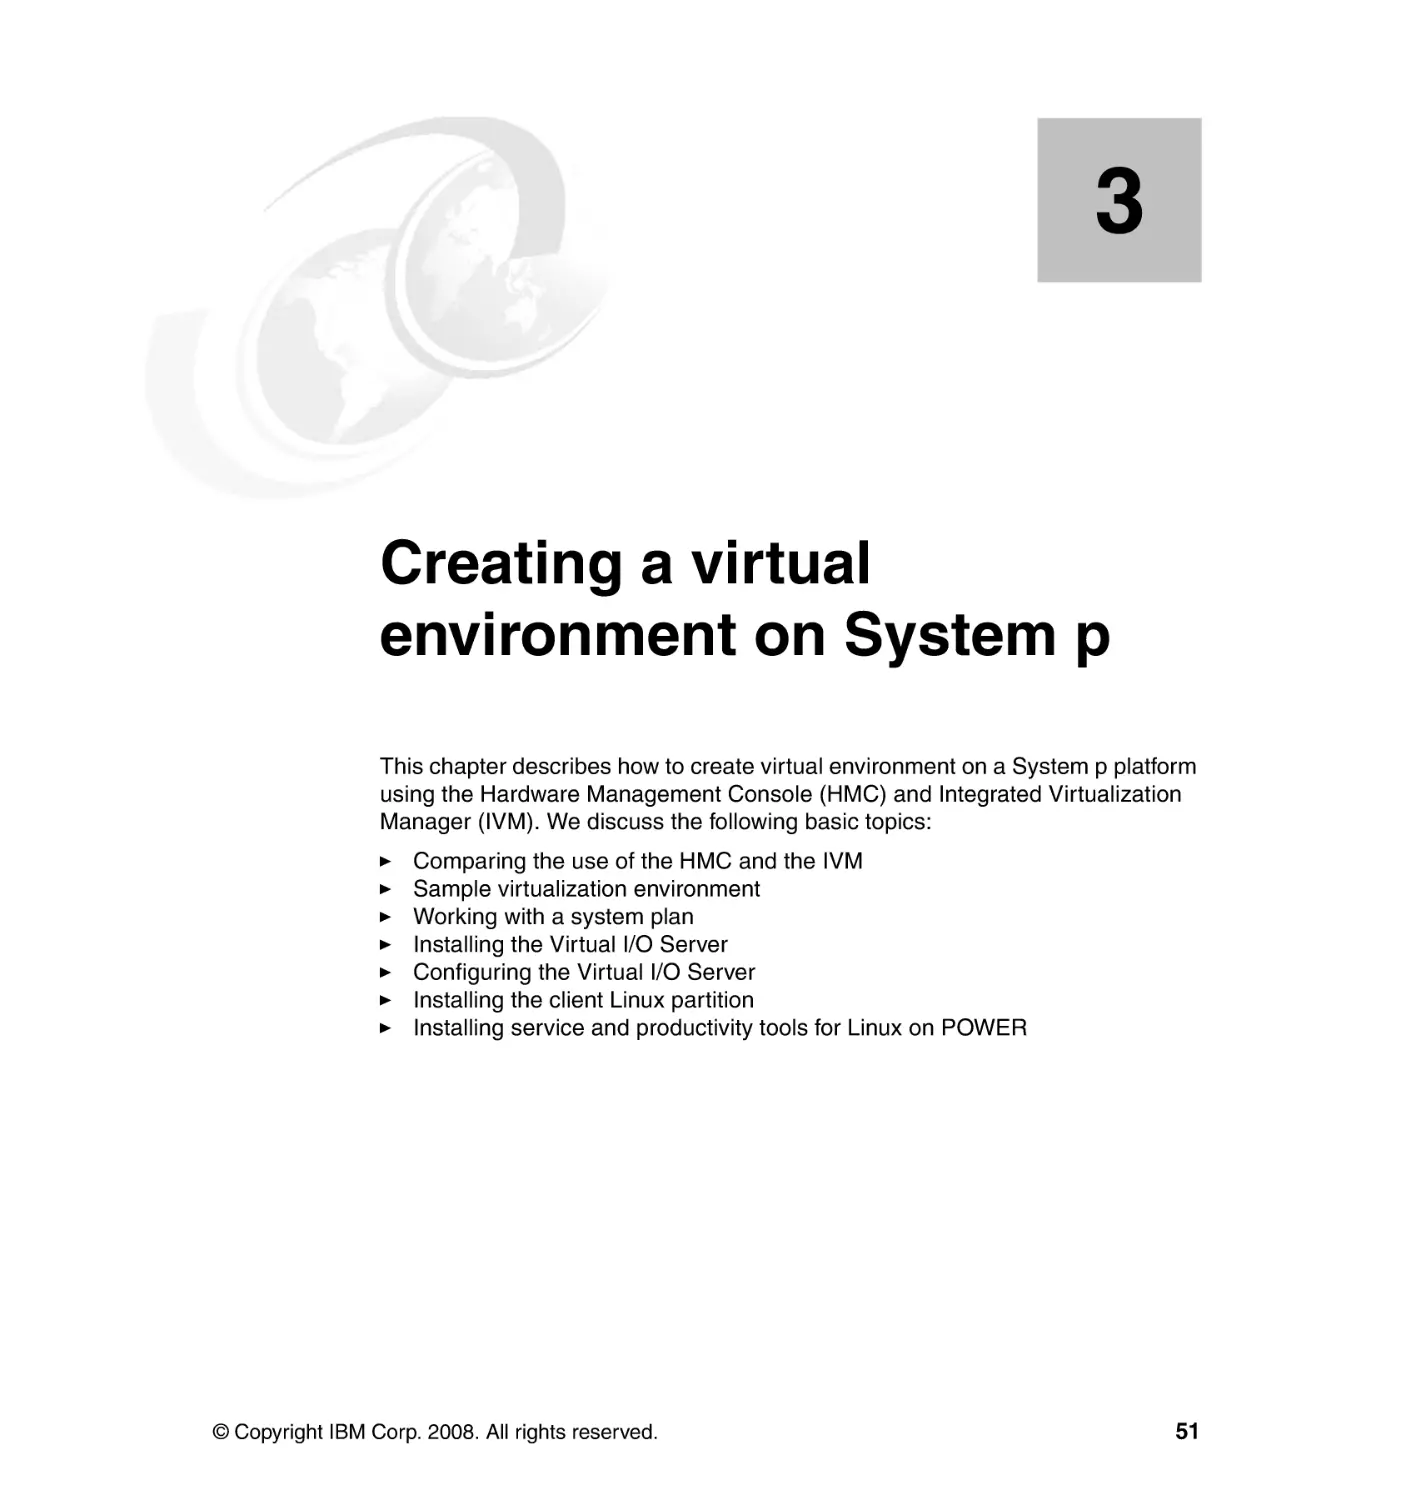 Chapter 3. Creating a virtual environment on System p